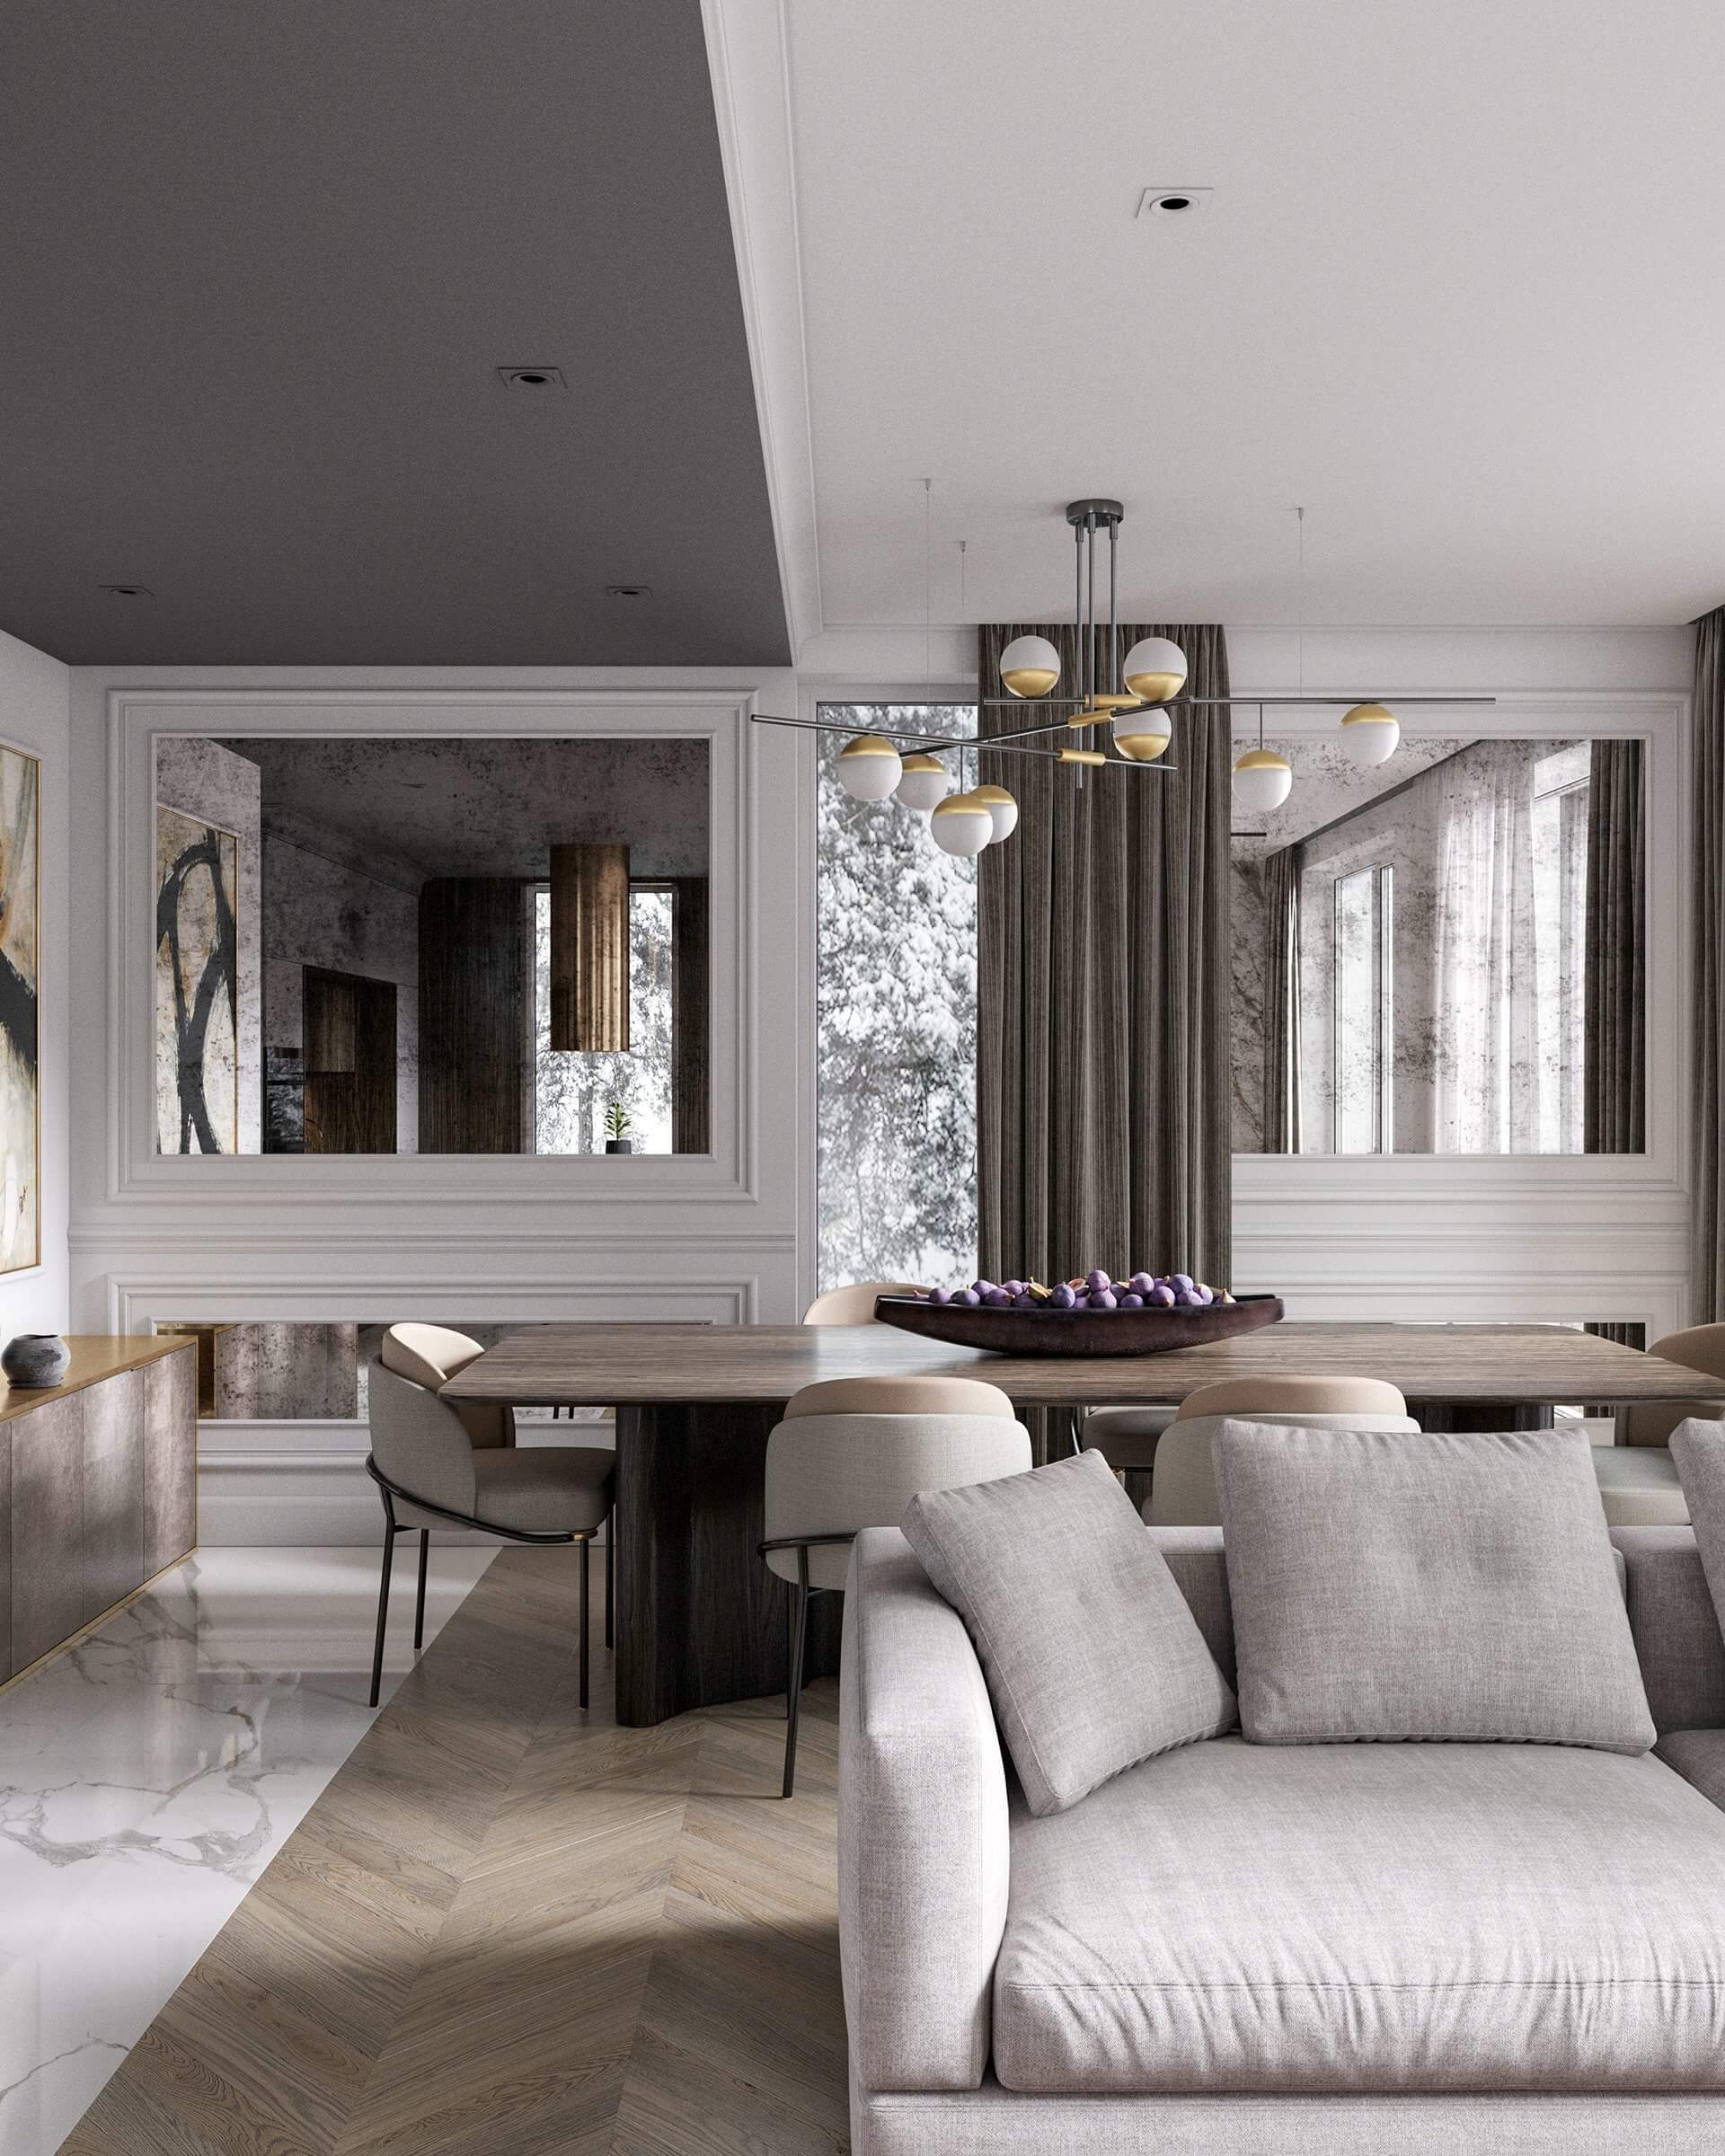 Stylish interior concept design living and dining room - cgi visualization